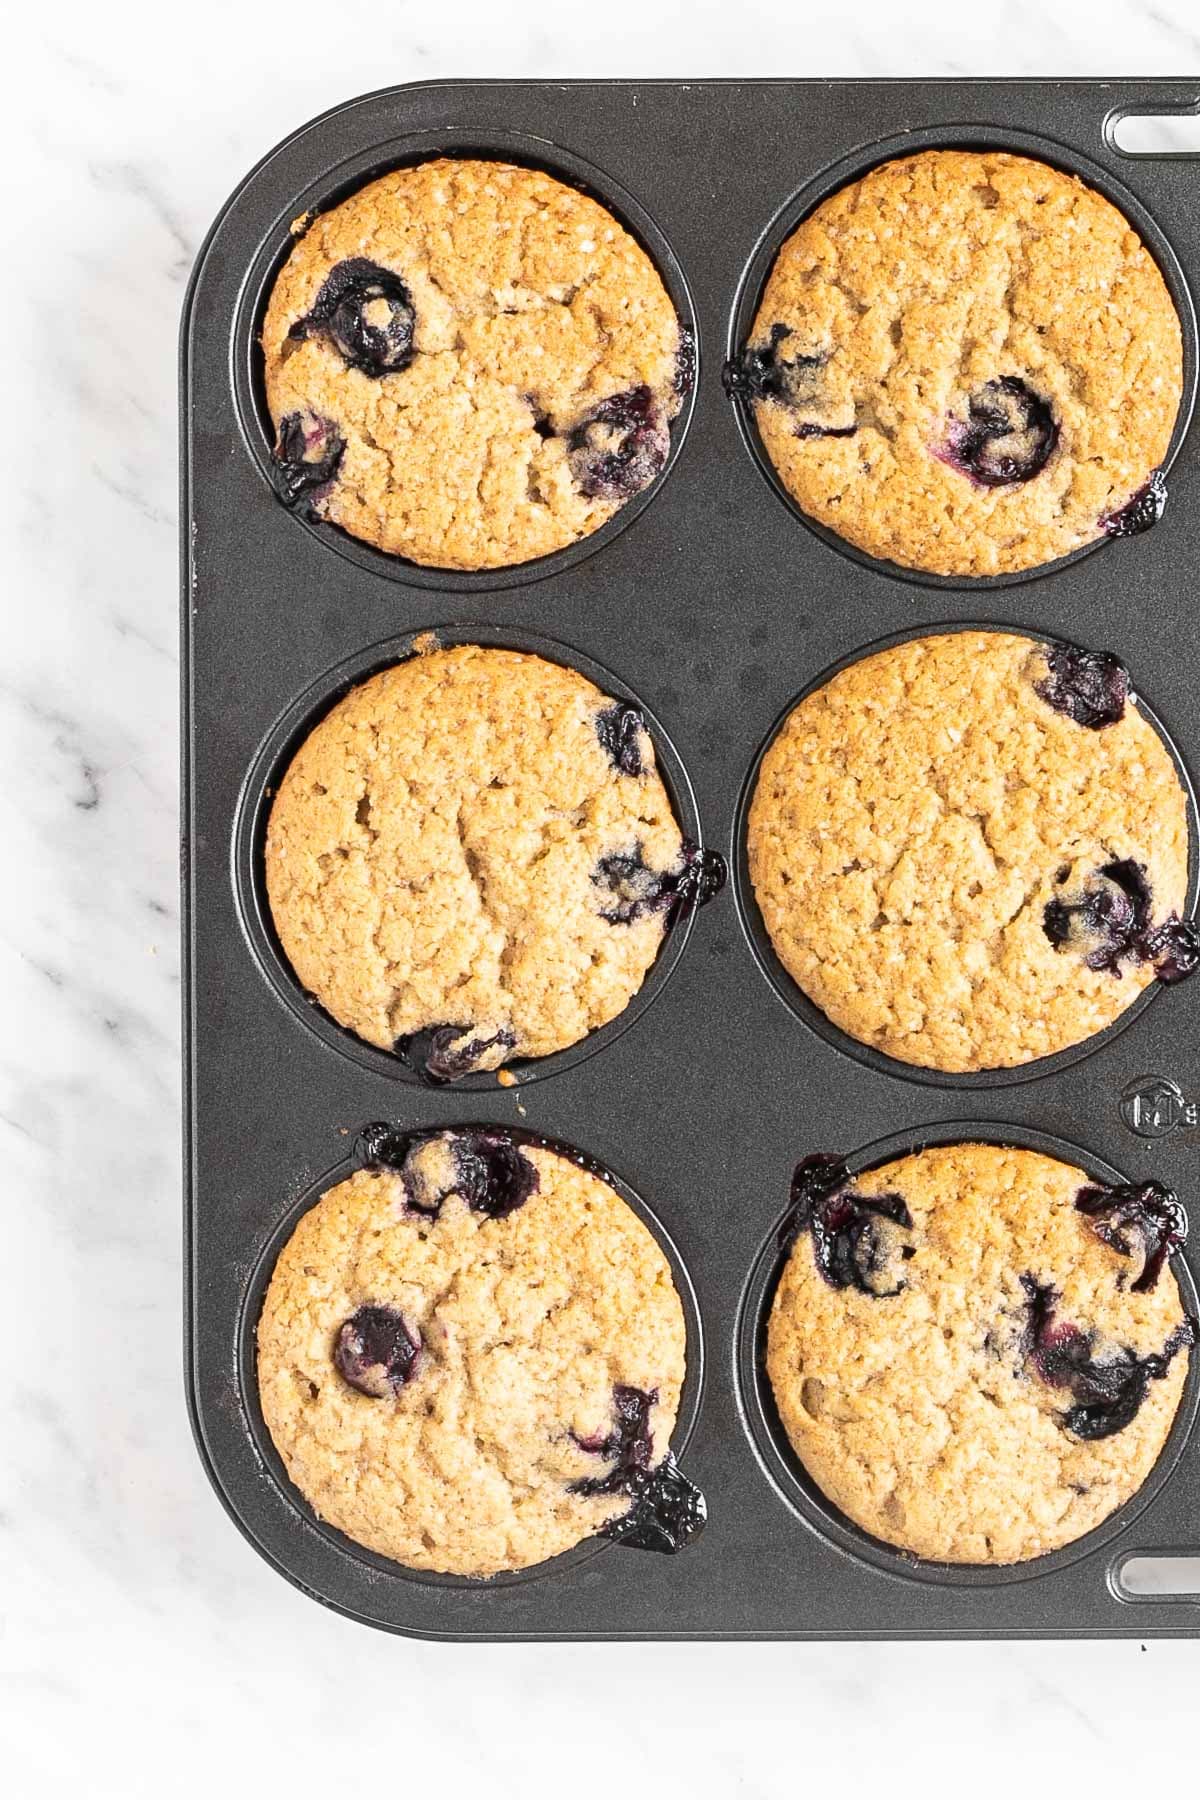 Baked lemon blueberry muffins in a muffin tin